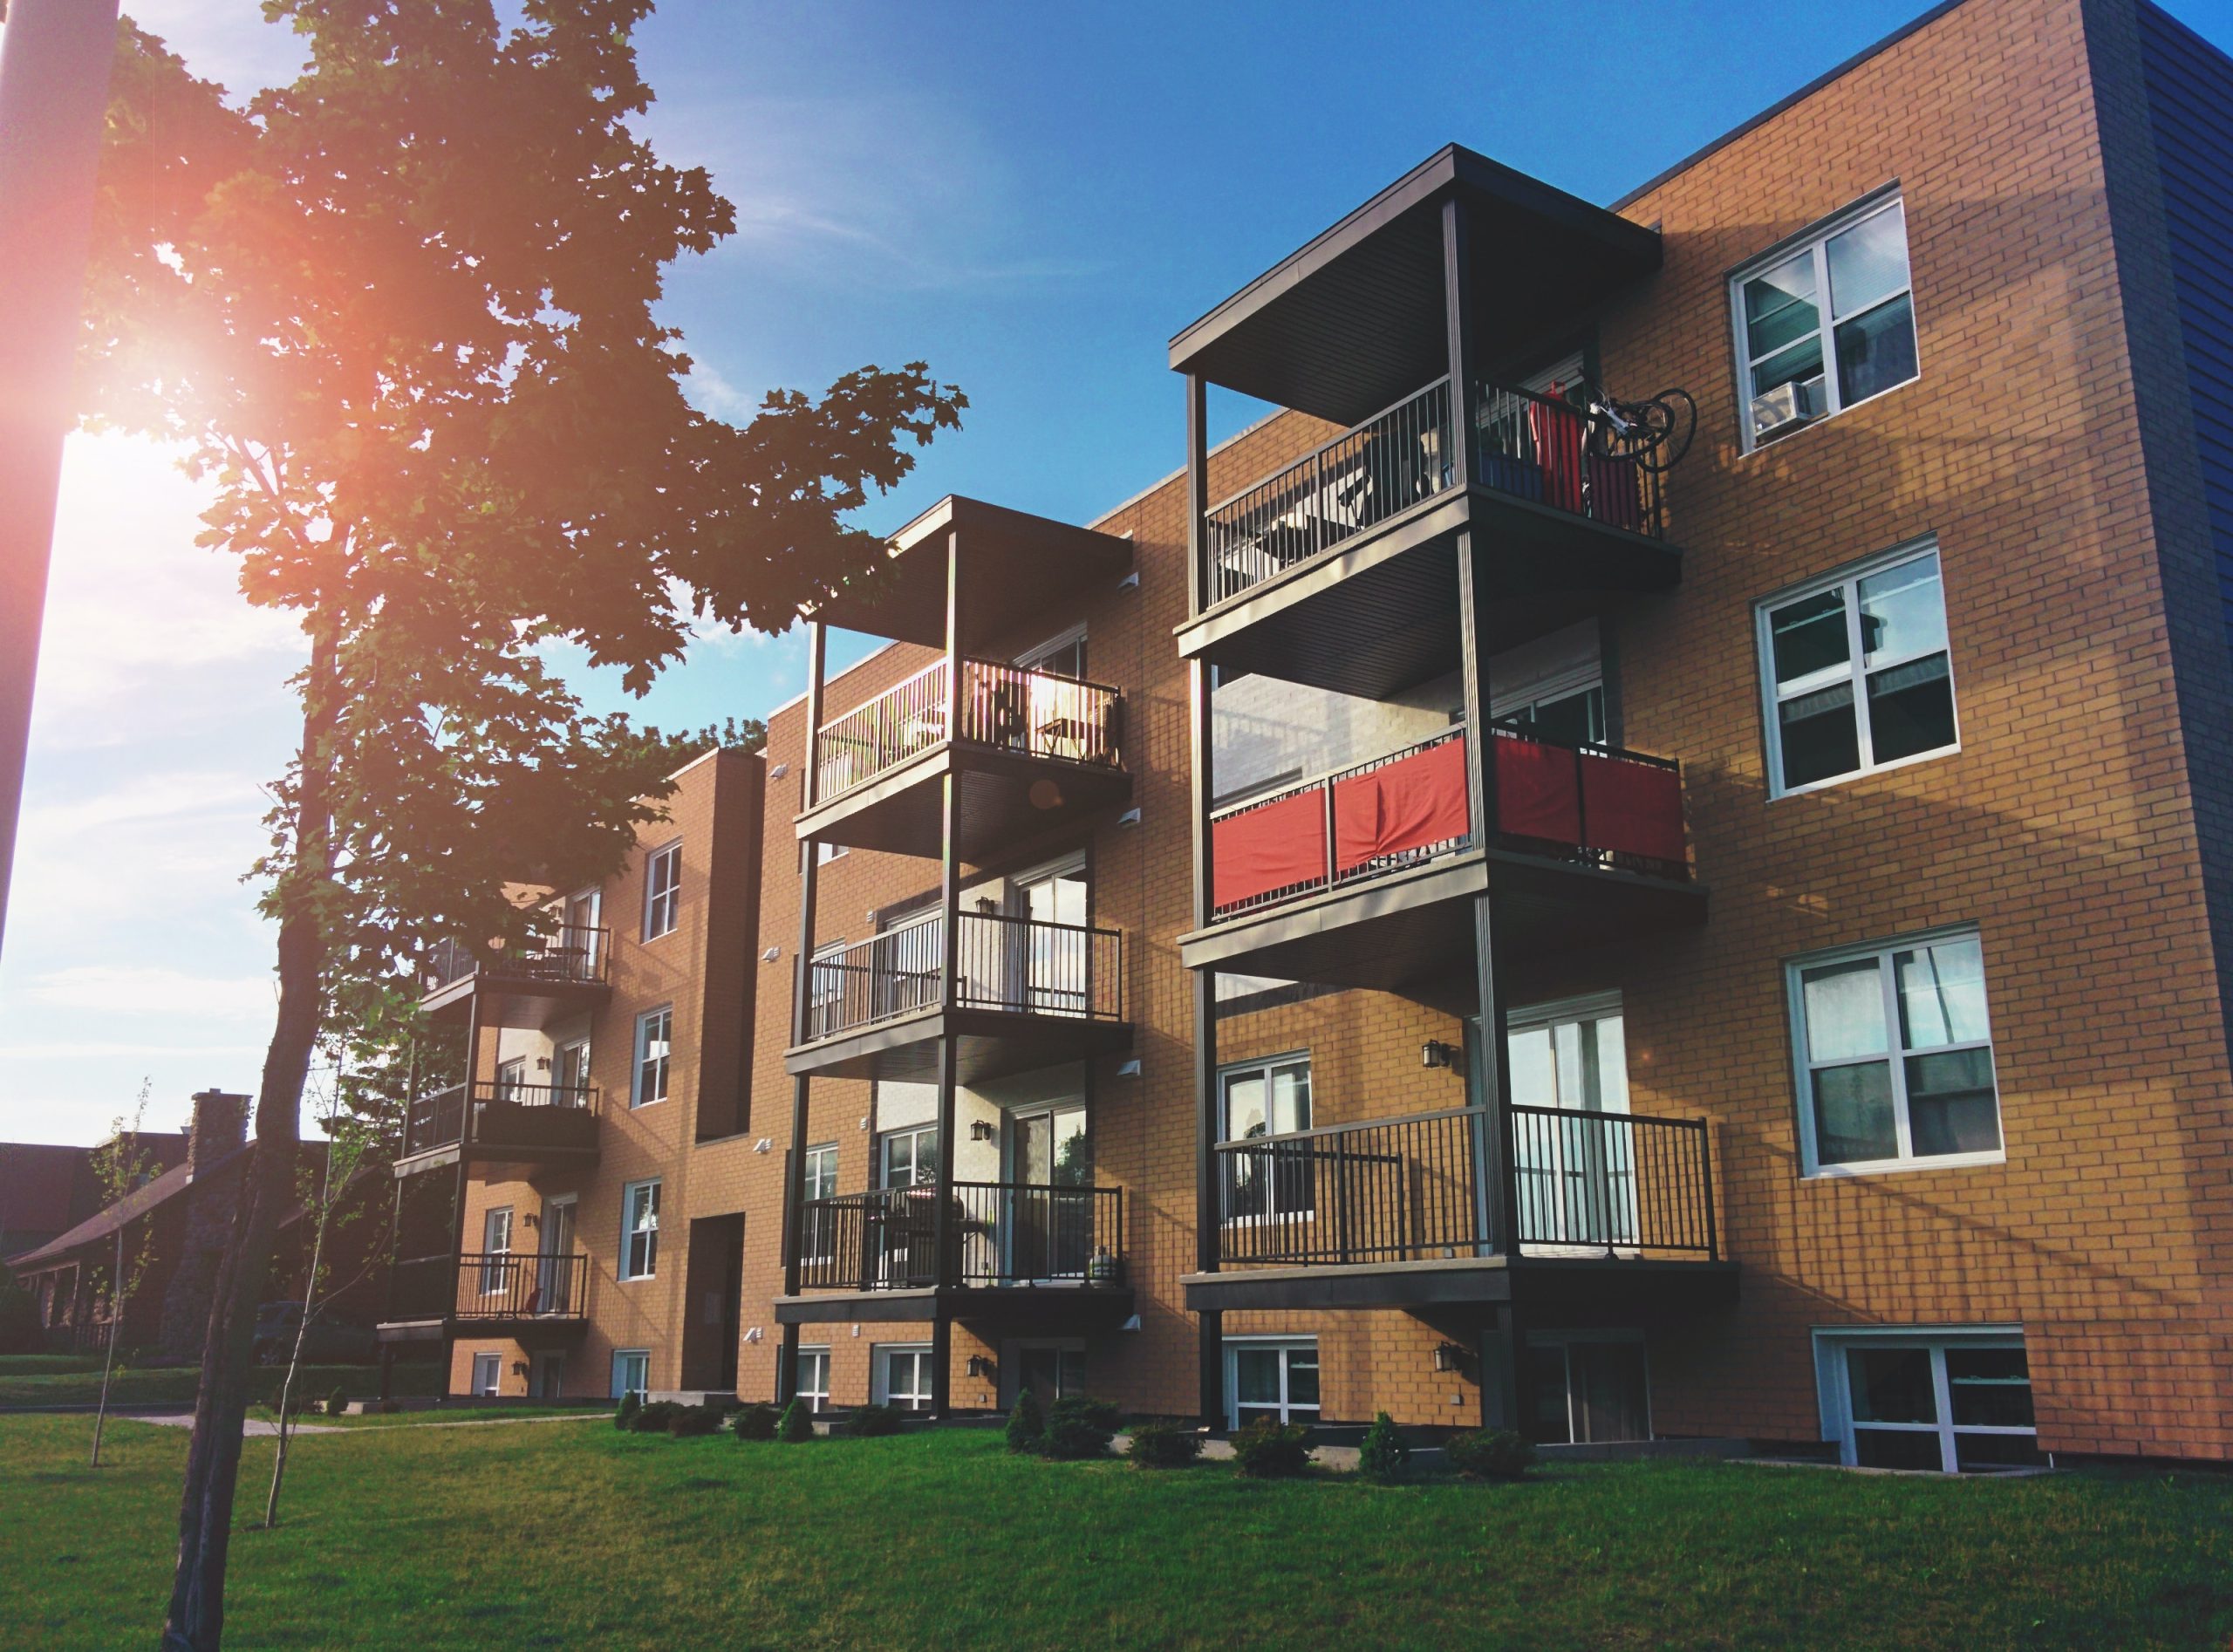 31 Tips for Efficient Multi-Family Property Management